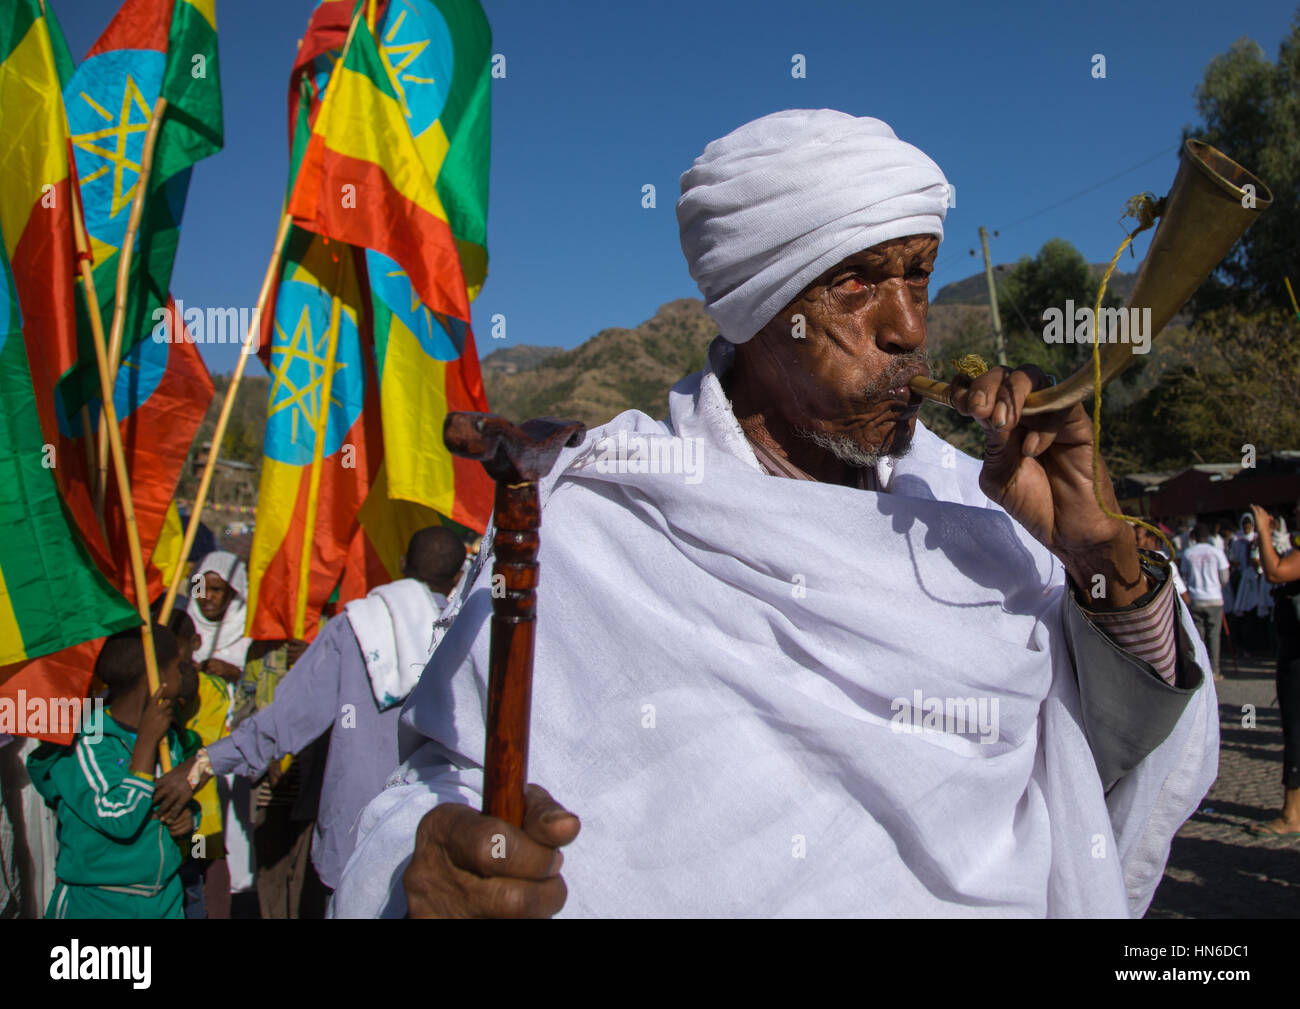 Ethiopian orthodox priest blowing in a horn during the colorful Timkat epiphany festival, Amhara region, Lalibela, Ethiopia Stock Photo